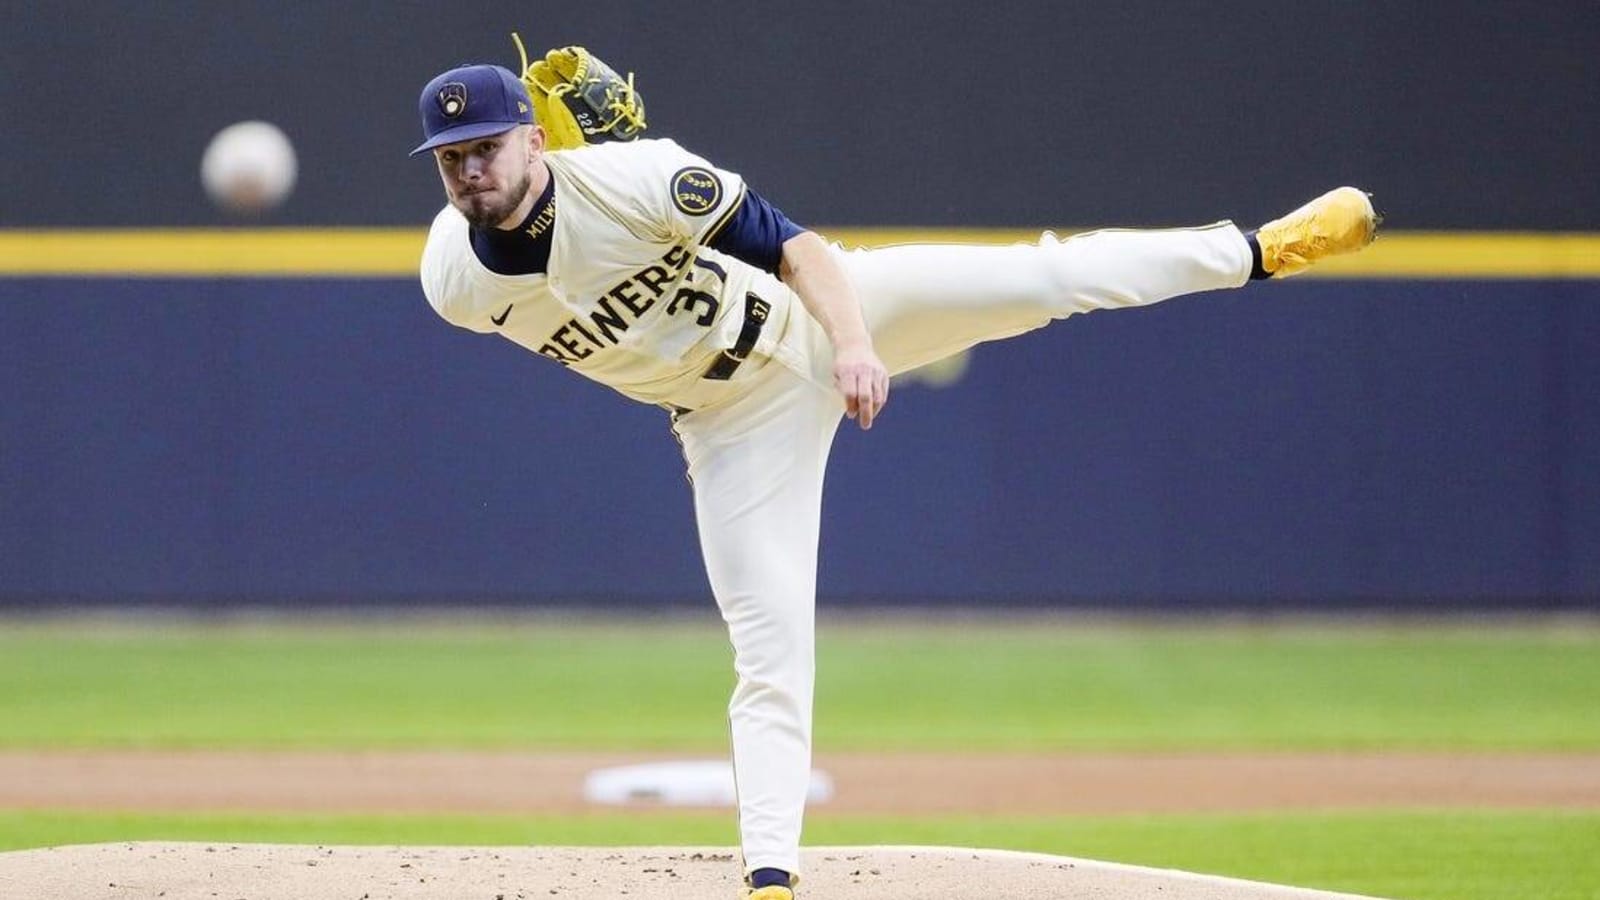 Brewers place LHP DL Hall (knee) on 15-day injured list